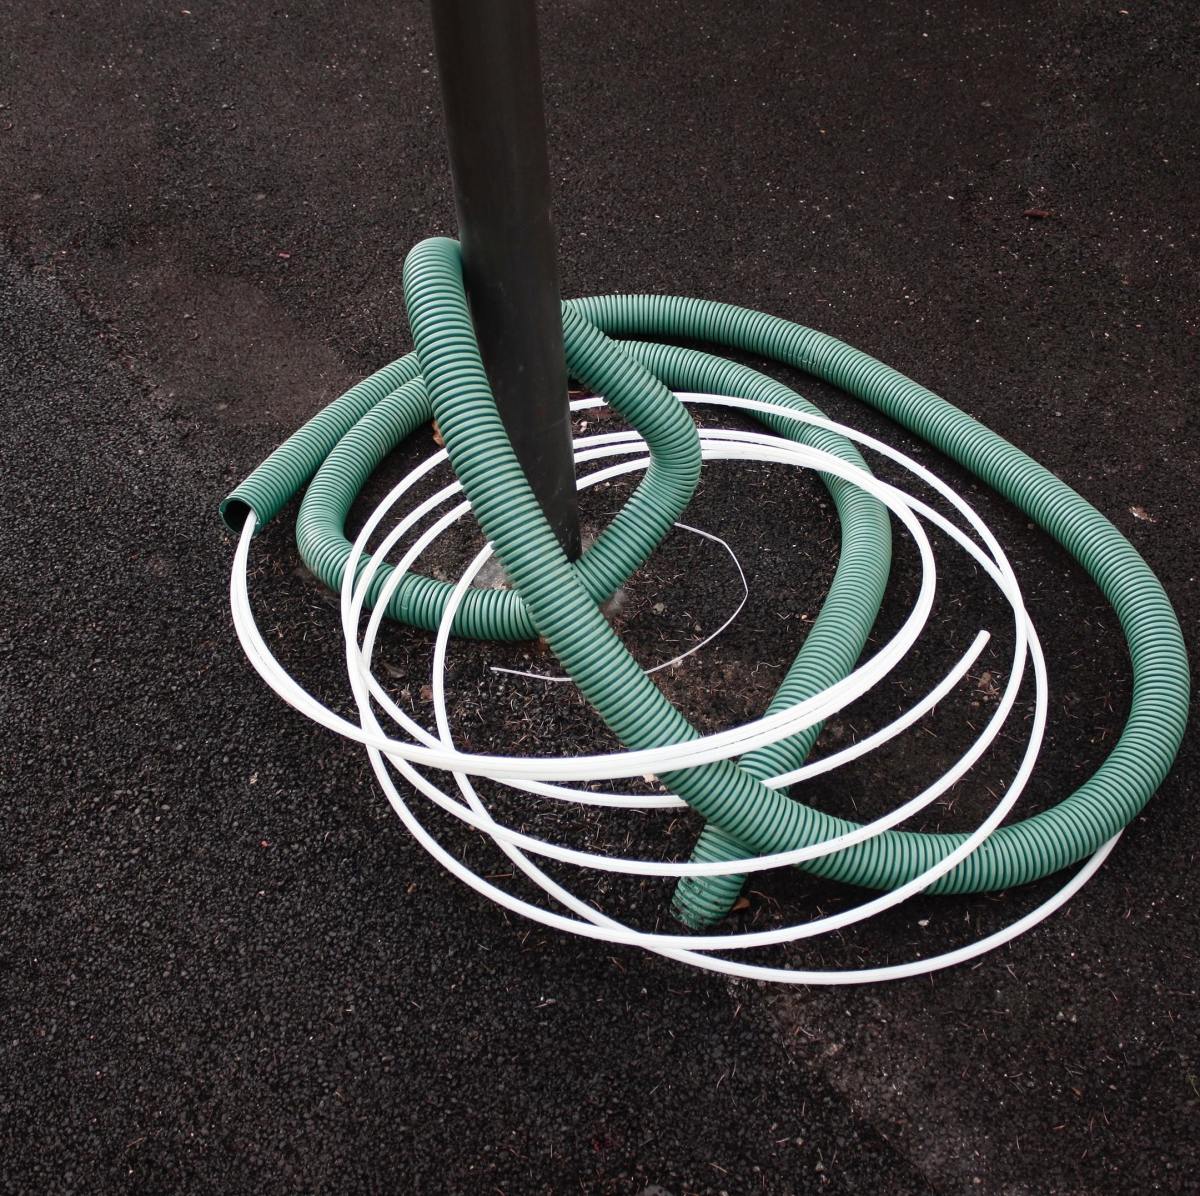 The Best Ways to Use, Store, and Protect Your RV Hoses